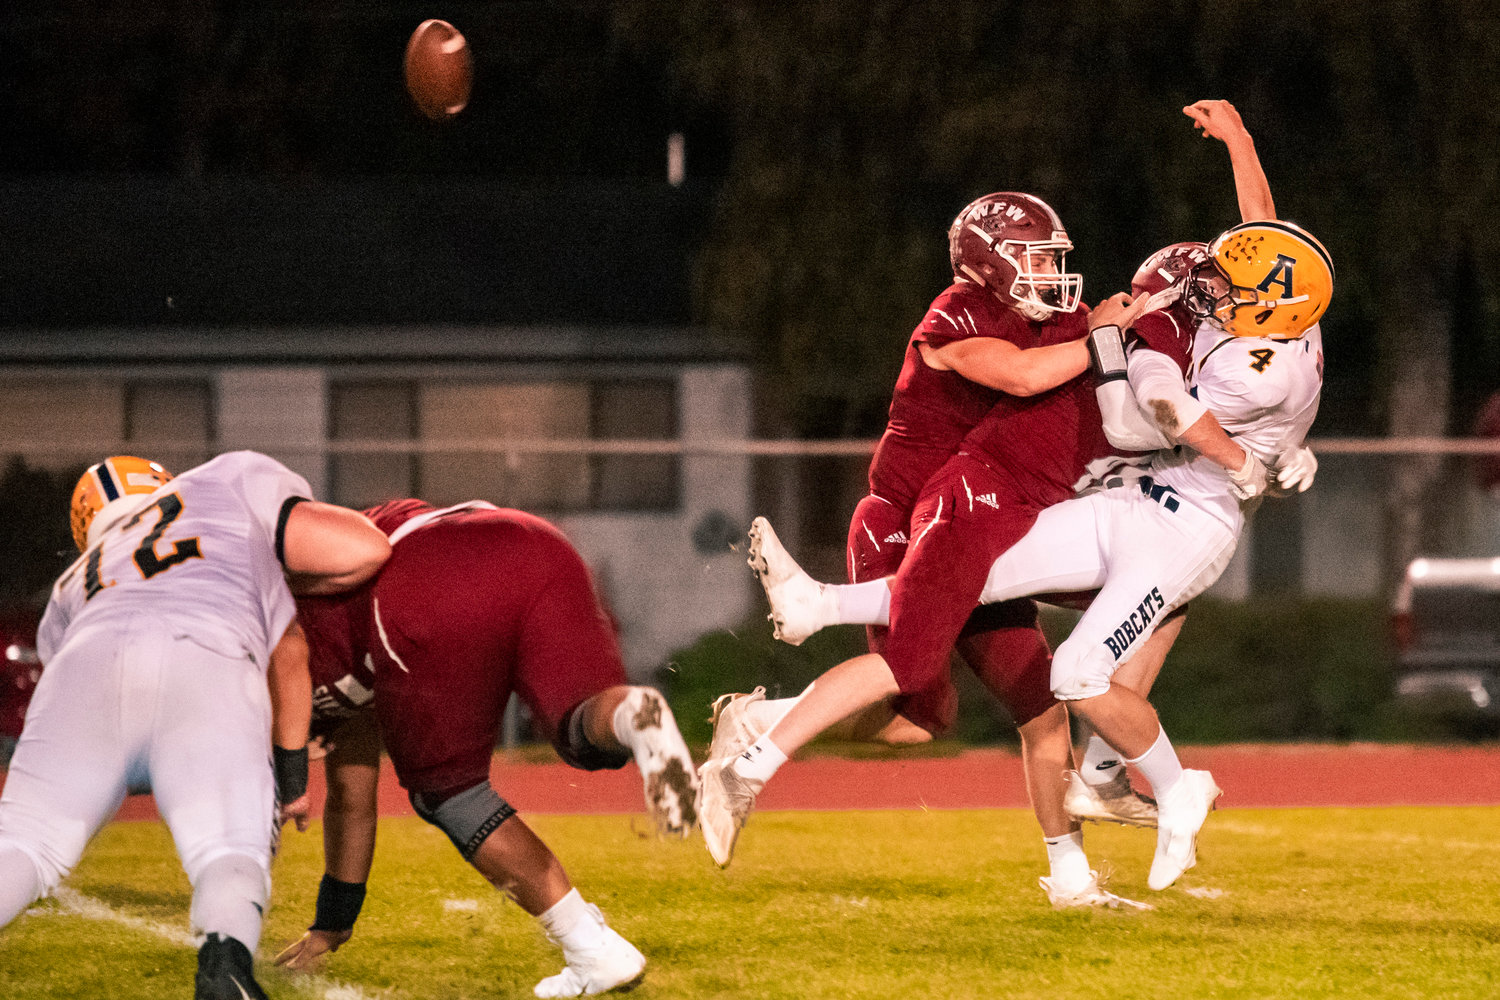 Bearcat defenders put a hit on Aberdeen’s Quarterback Kale Goings (4) as he throws the football incomplete Friday night in Chehalis.